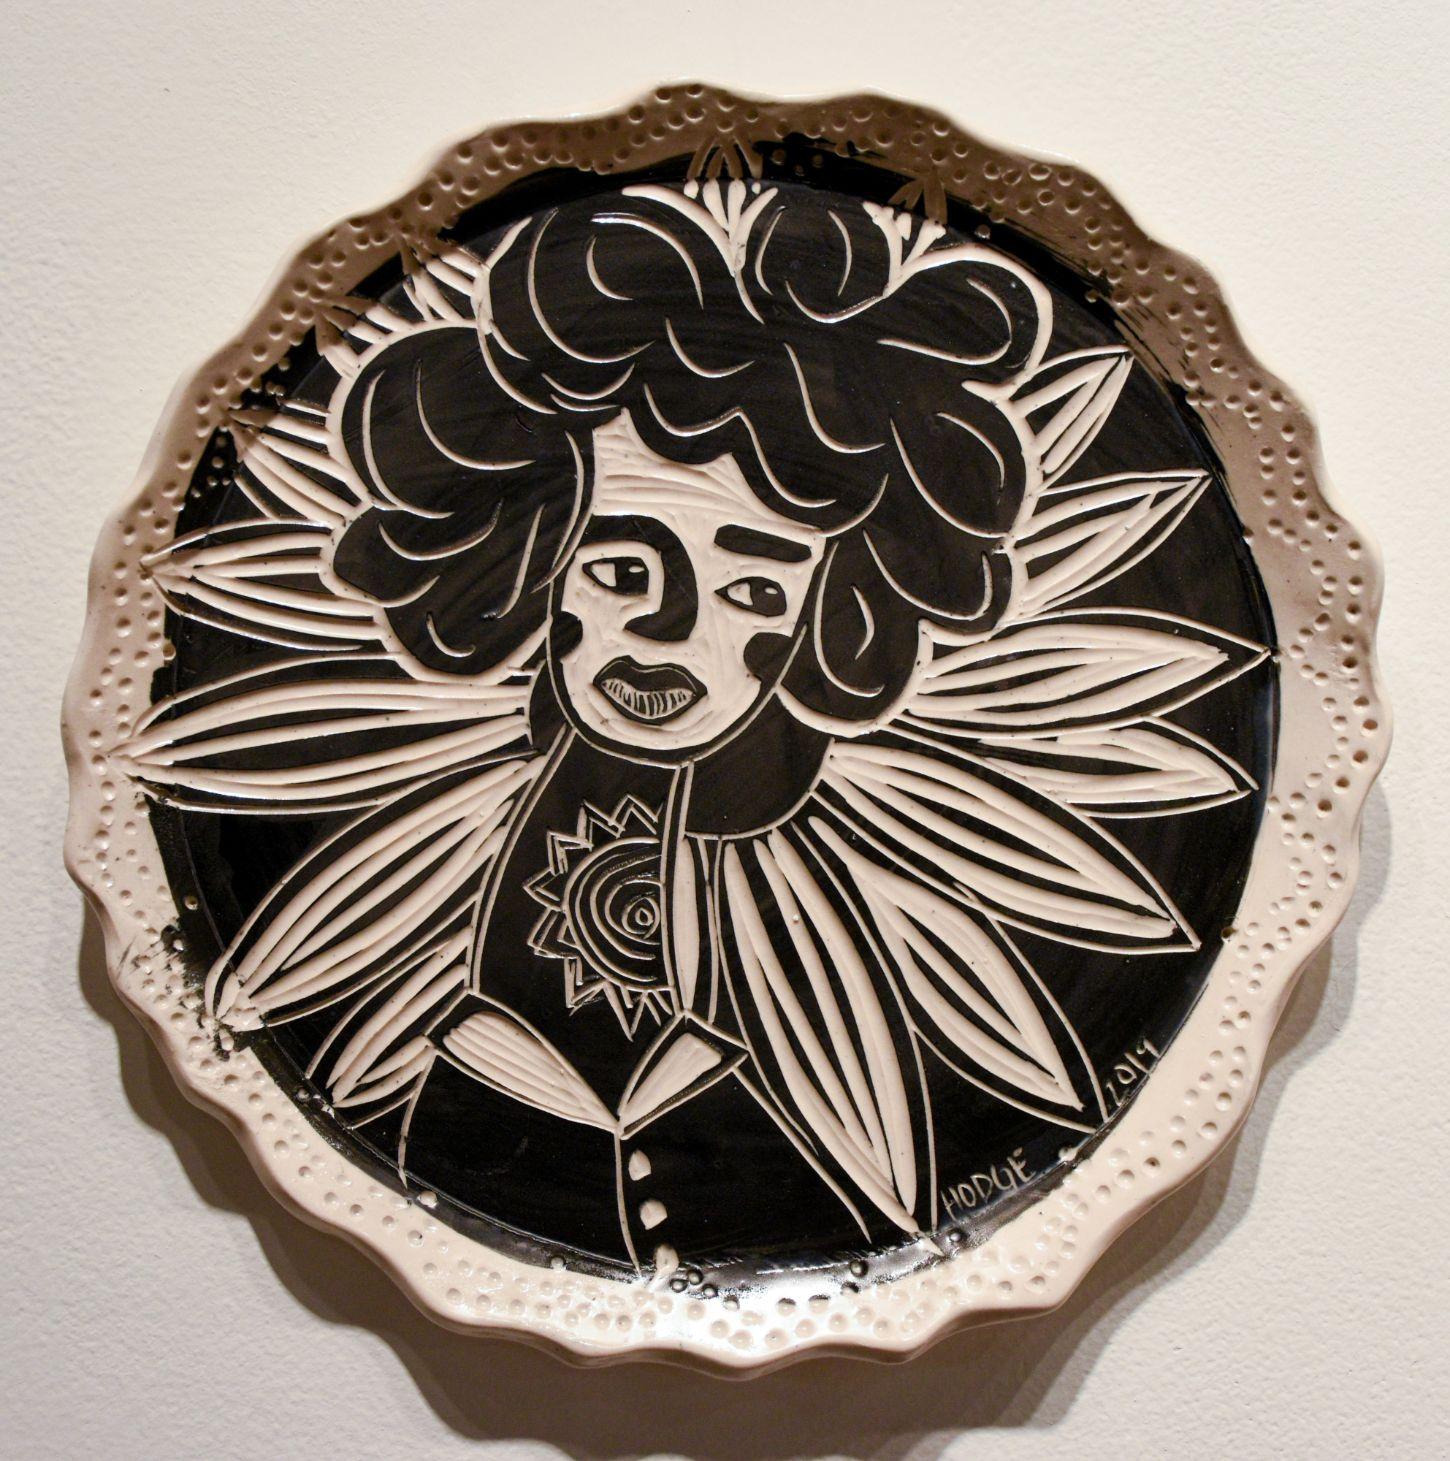 Inherent Light and Chin Up Diptych, Portrait, 2019 by Alex Hodge
Hand carved porcelain plate 
Overall size: 11 H in x 22 DM in
Individual size: 11 H in x 11 DM in
Unique

Her poetic porcelain plates examine and reimagine the history of art in a way